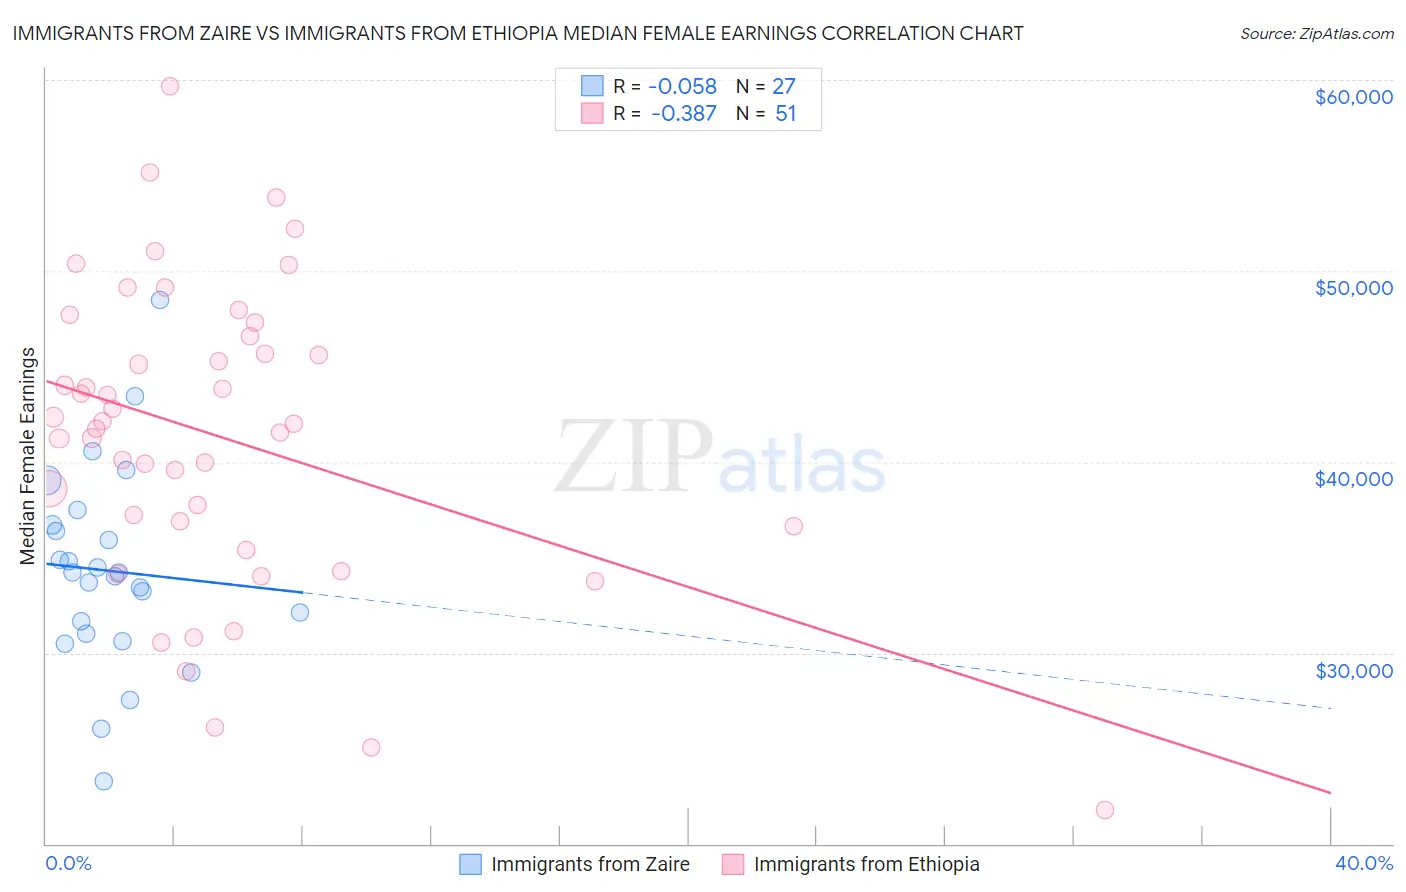 Immigrants from Zaire vs Immigrants from Ethiopia Median Female Earnings